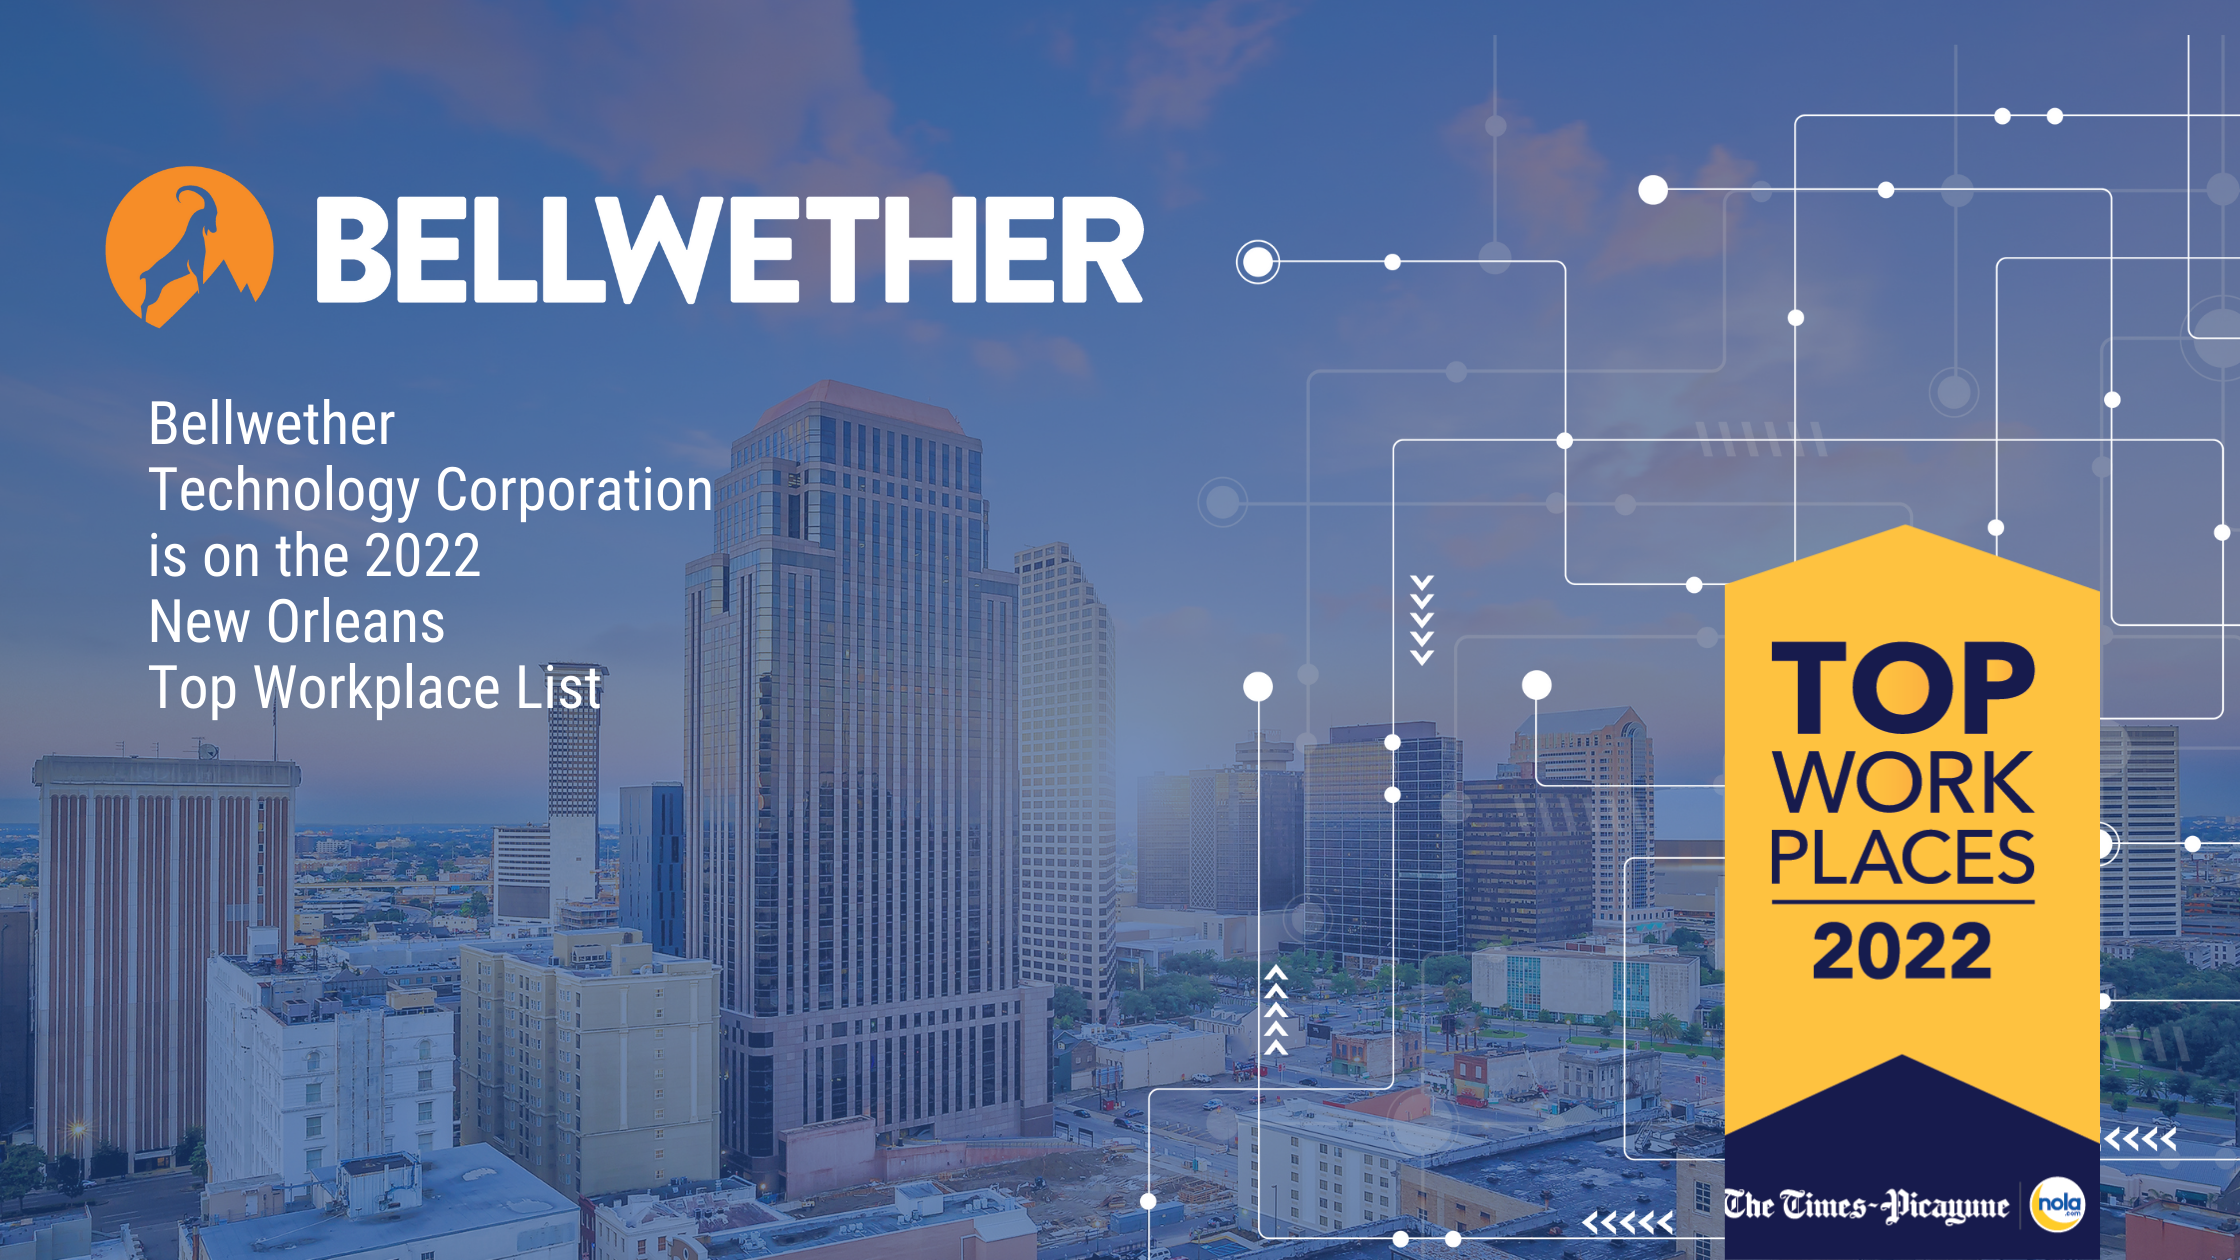 Bellwether Technology Corporation is on the 2022 New Orleans Top Workplace List